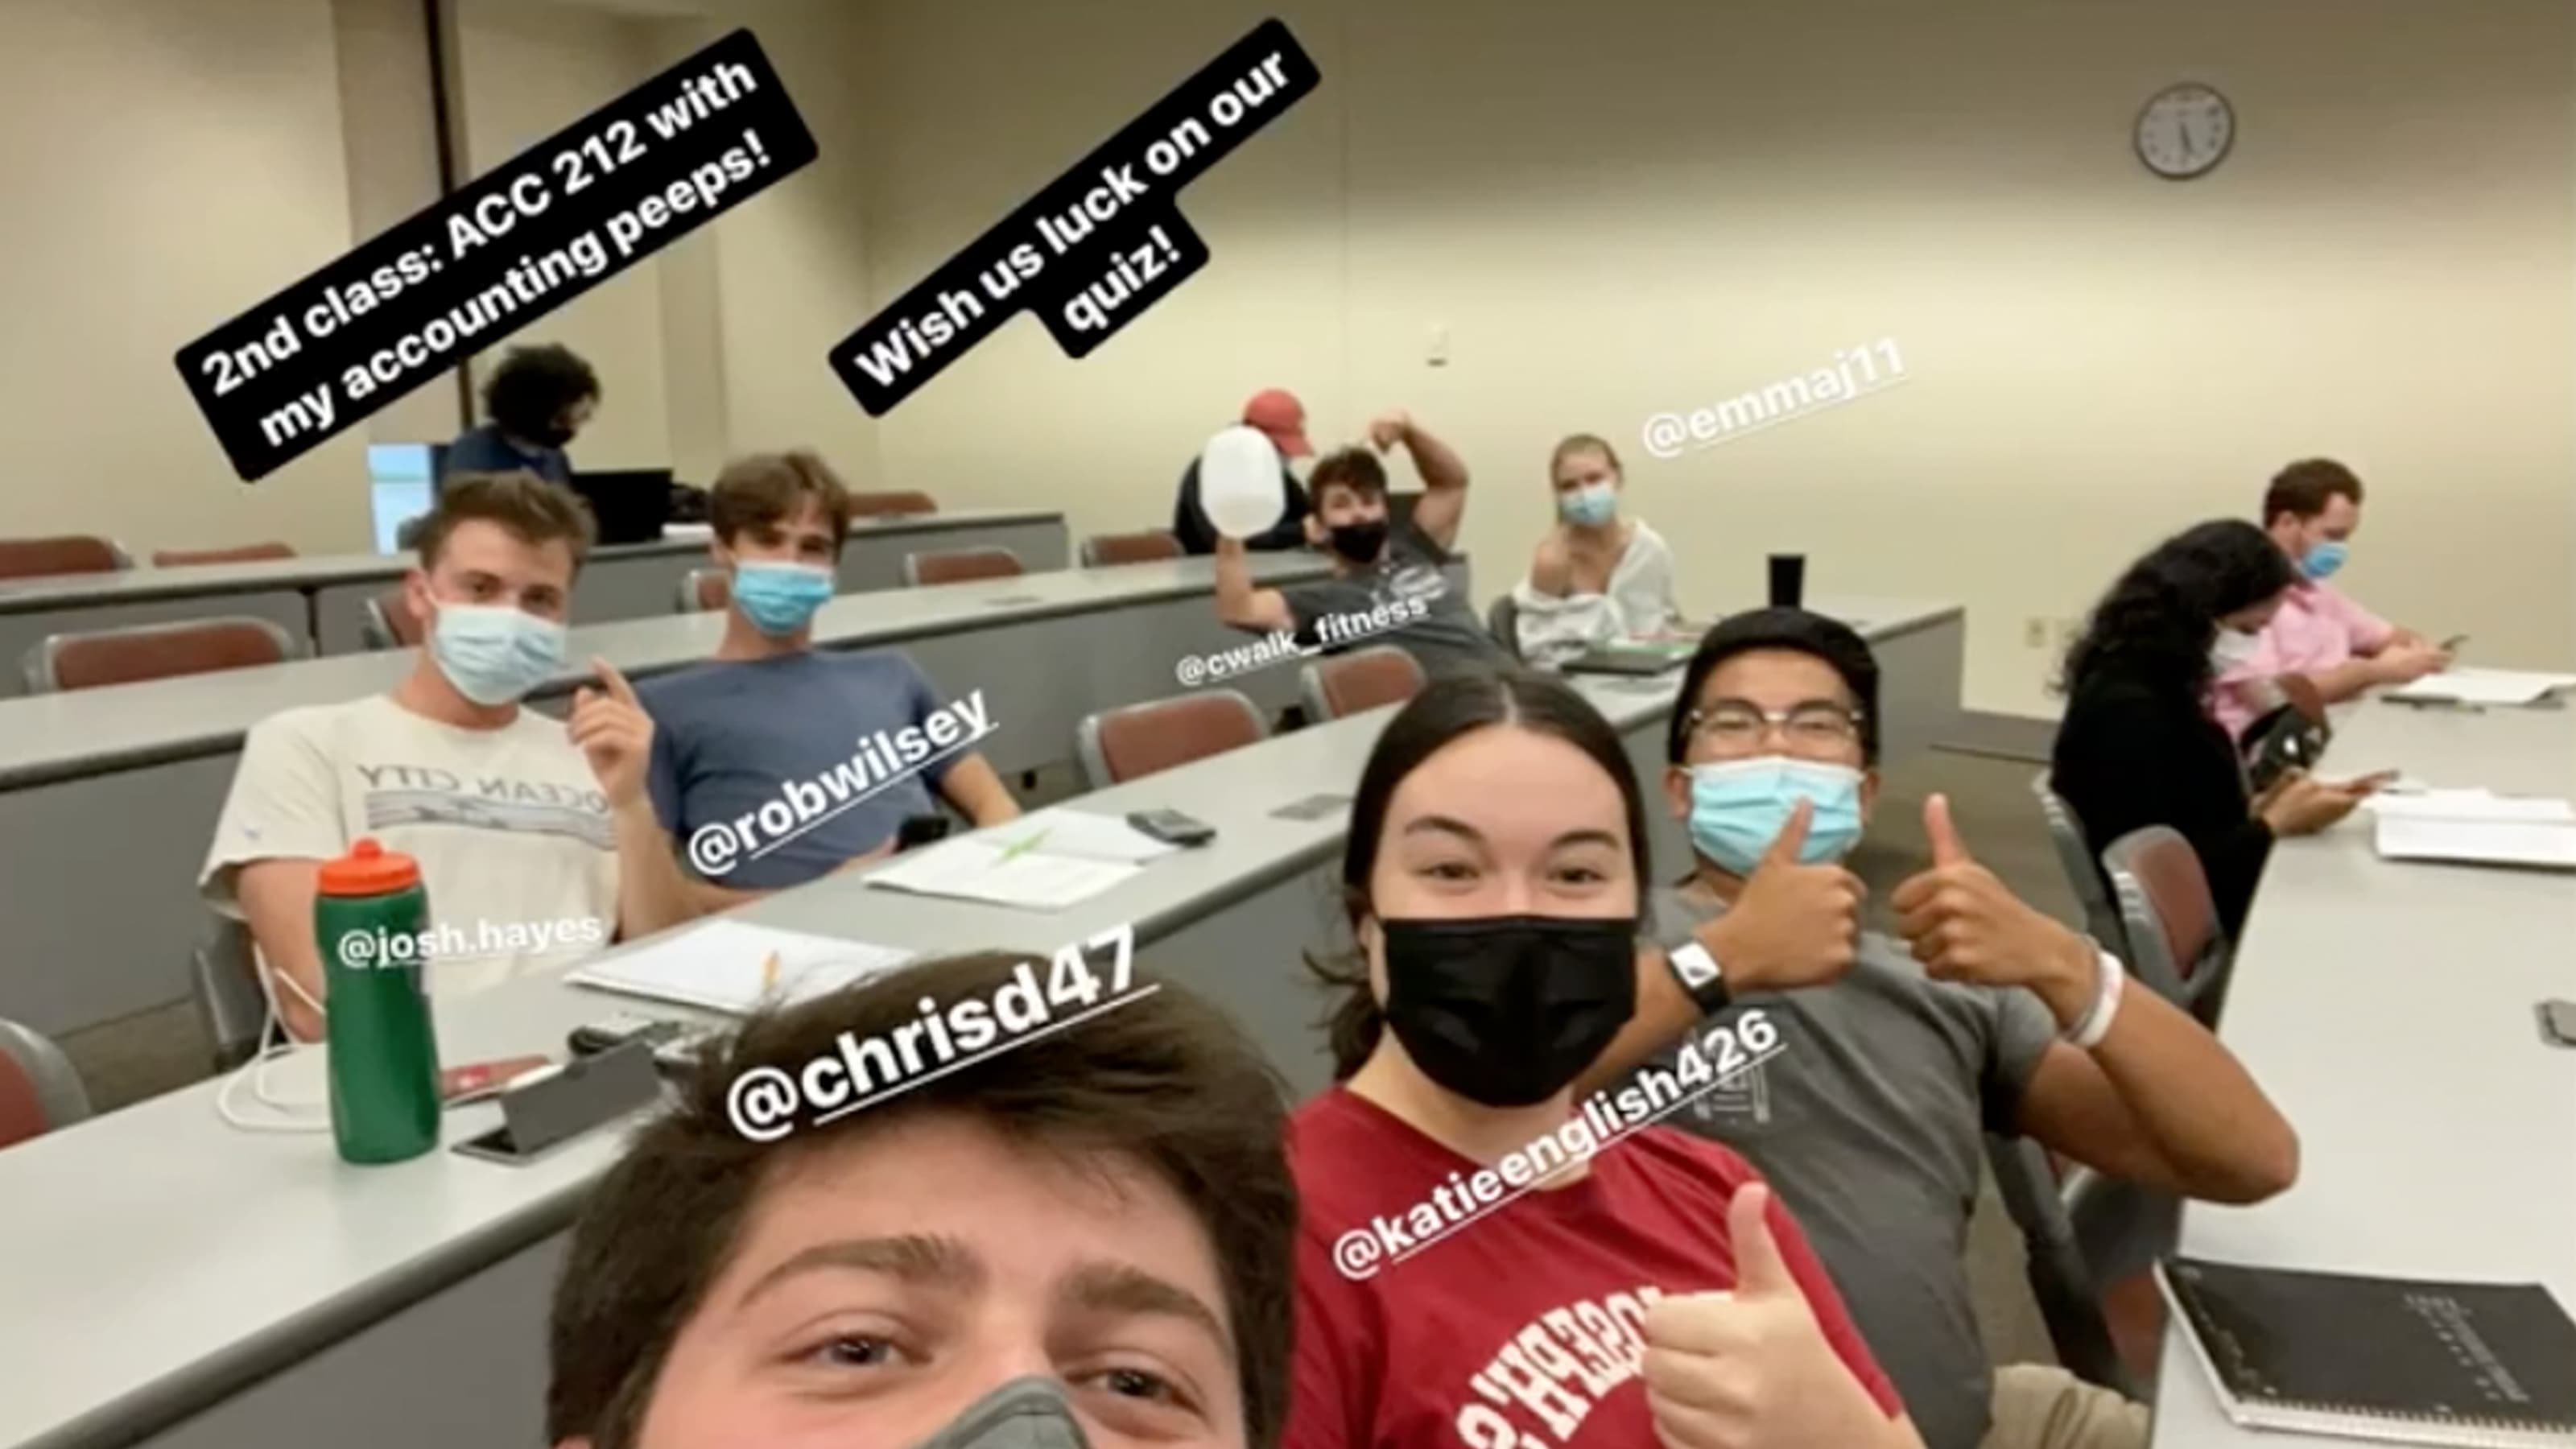 Students in masks give the camera a thumbs up in class